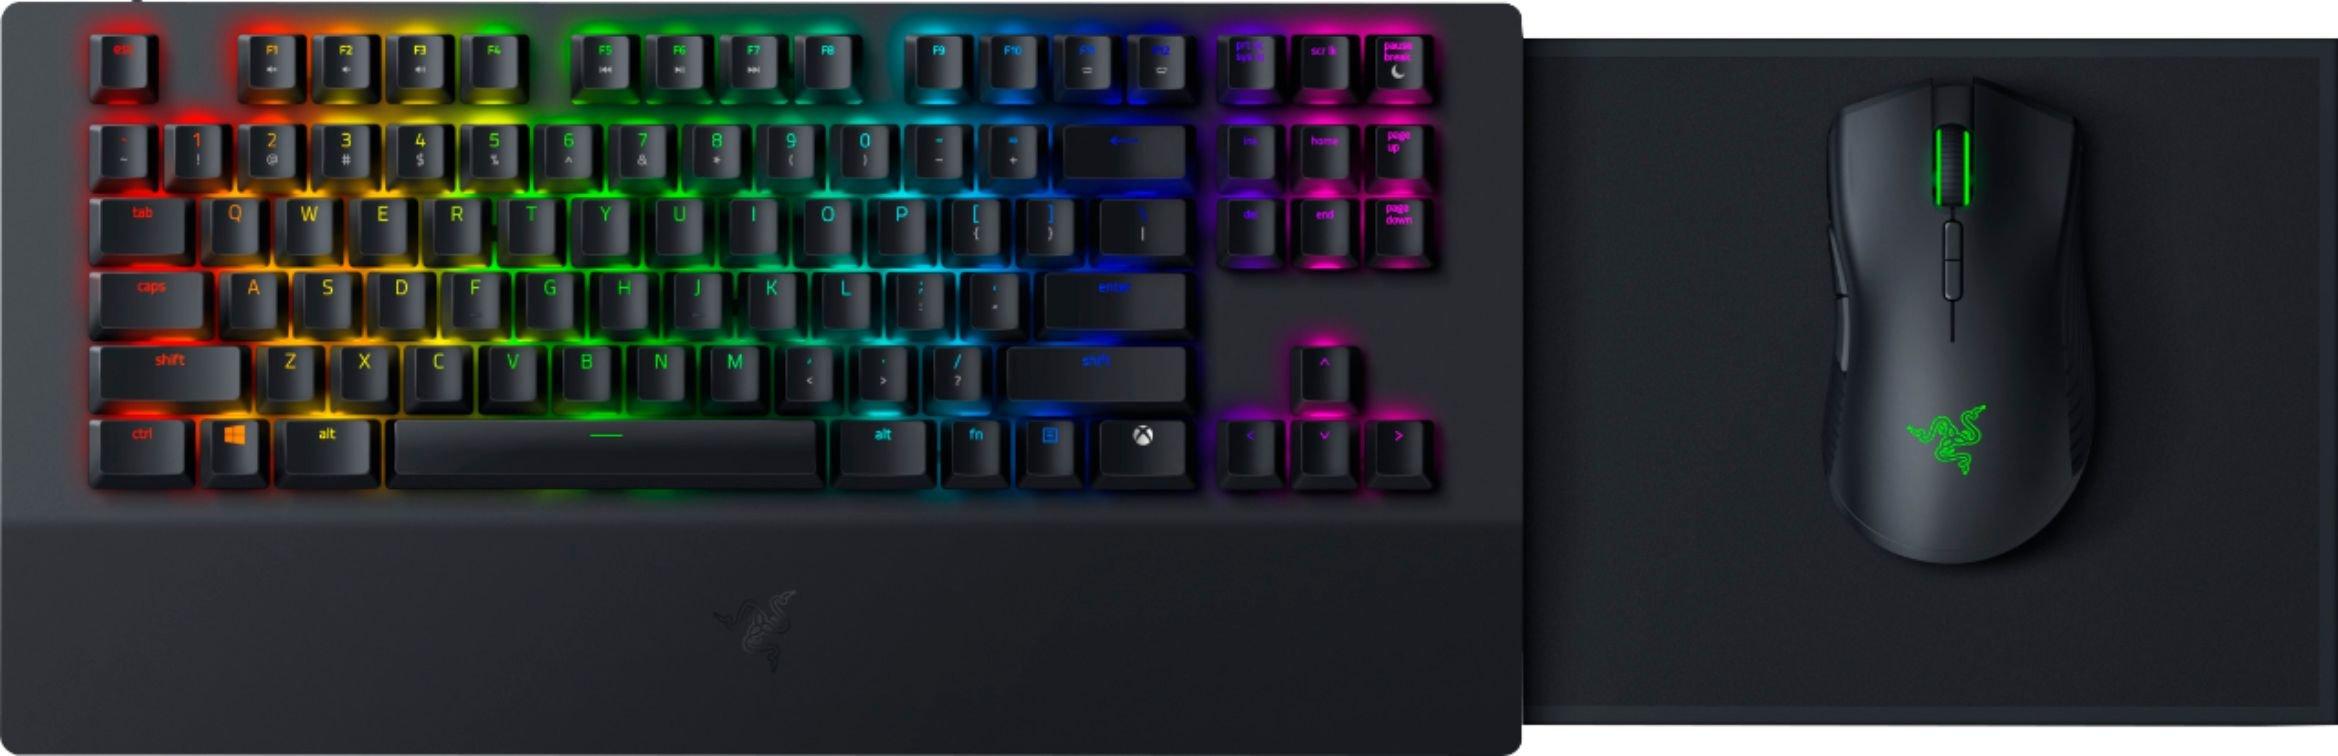 Razer Turret Black Wireless Mechanical Gaming Keyboard and Mouse for Xbox One